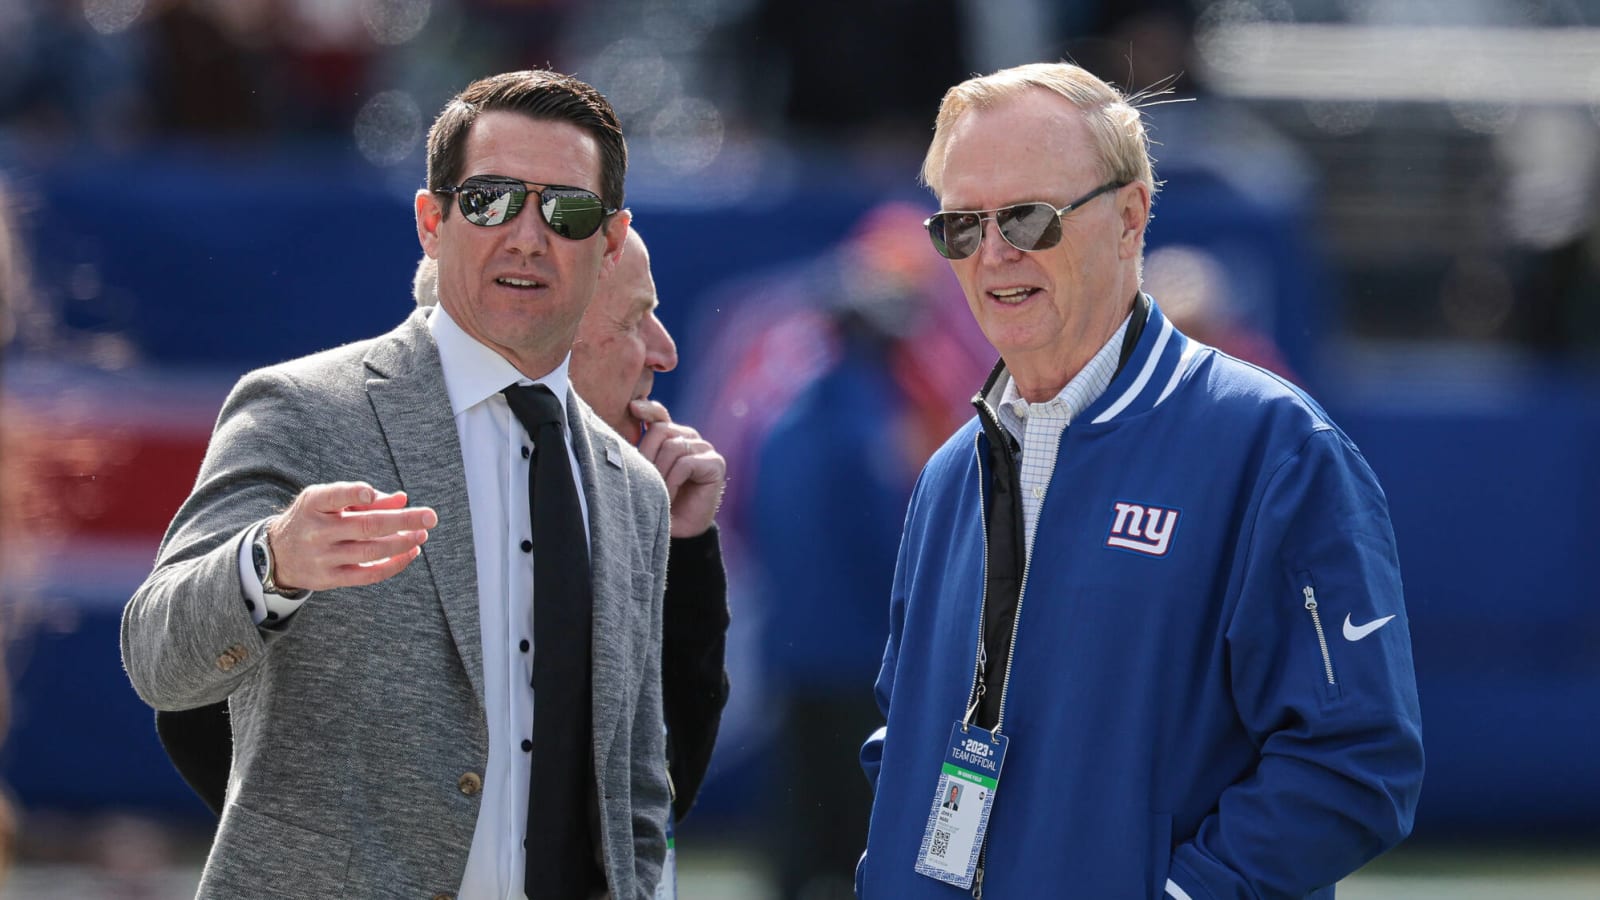 Giants have steep competition for top defensive coordinator choice